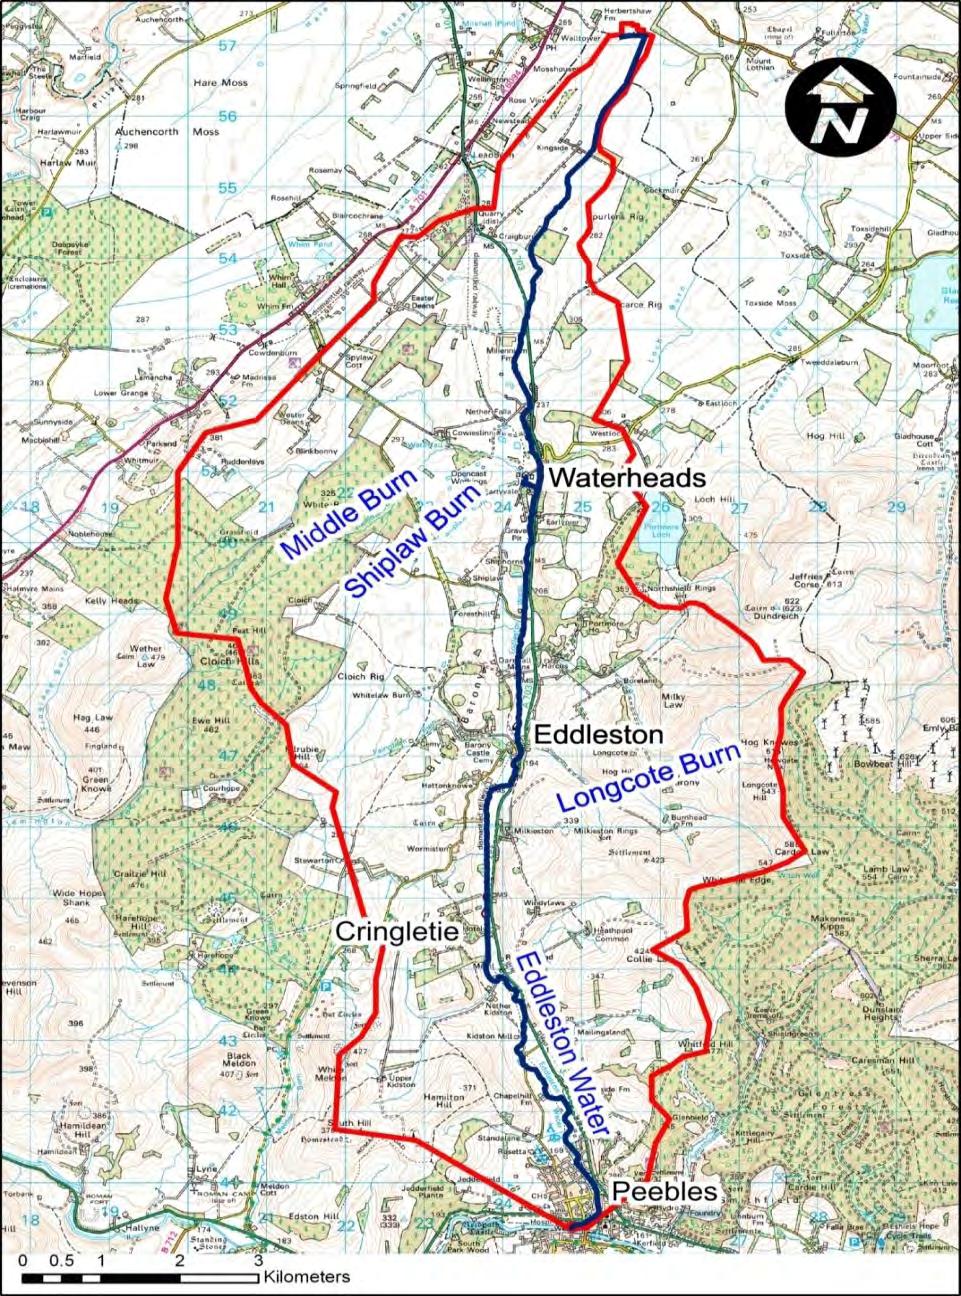 Eddleston Water historically suffered major changes Eddleston a typical Scottish catchment, with long history of agricultural land management Fractured greywackes mantled with highly variable covers